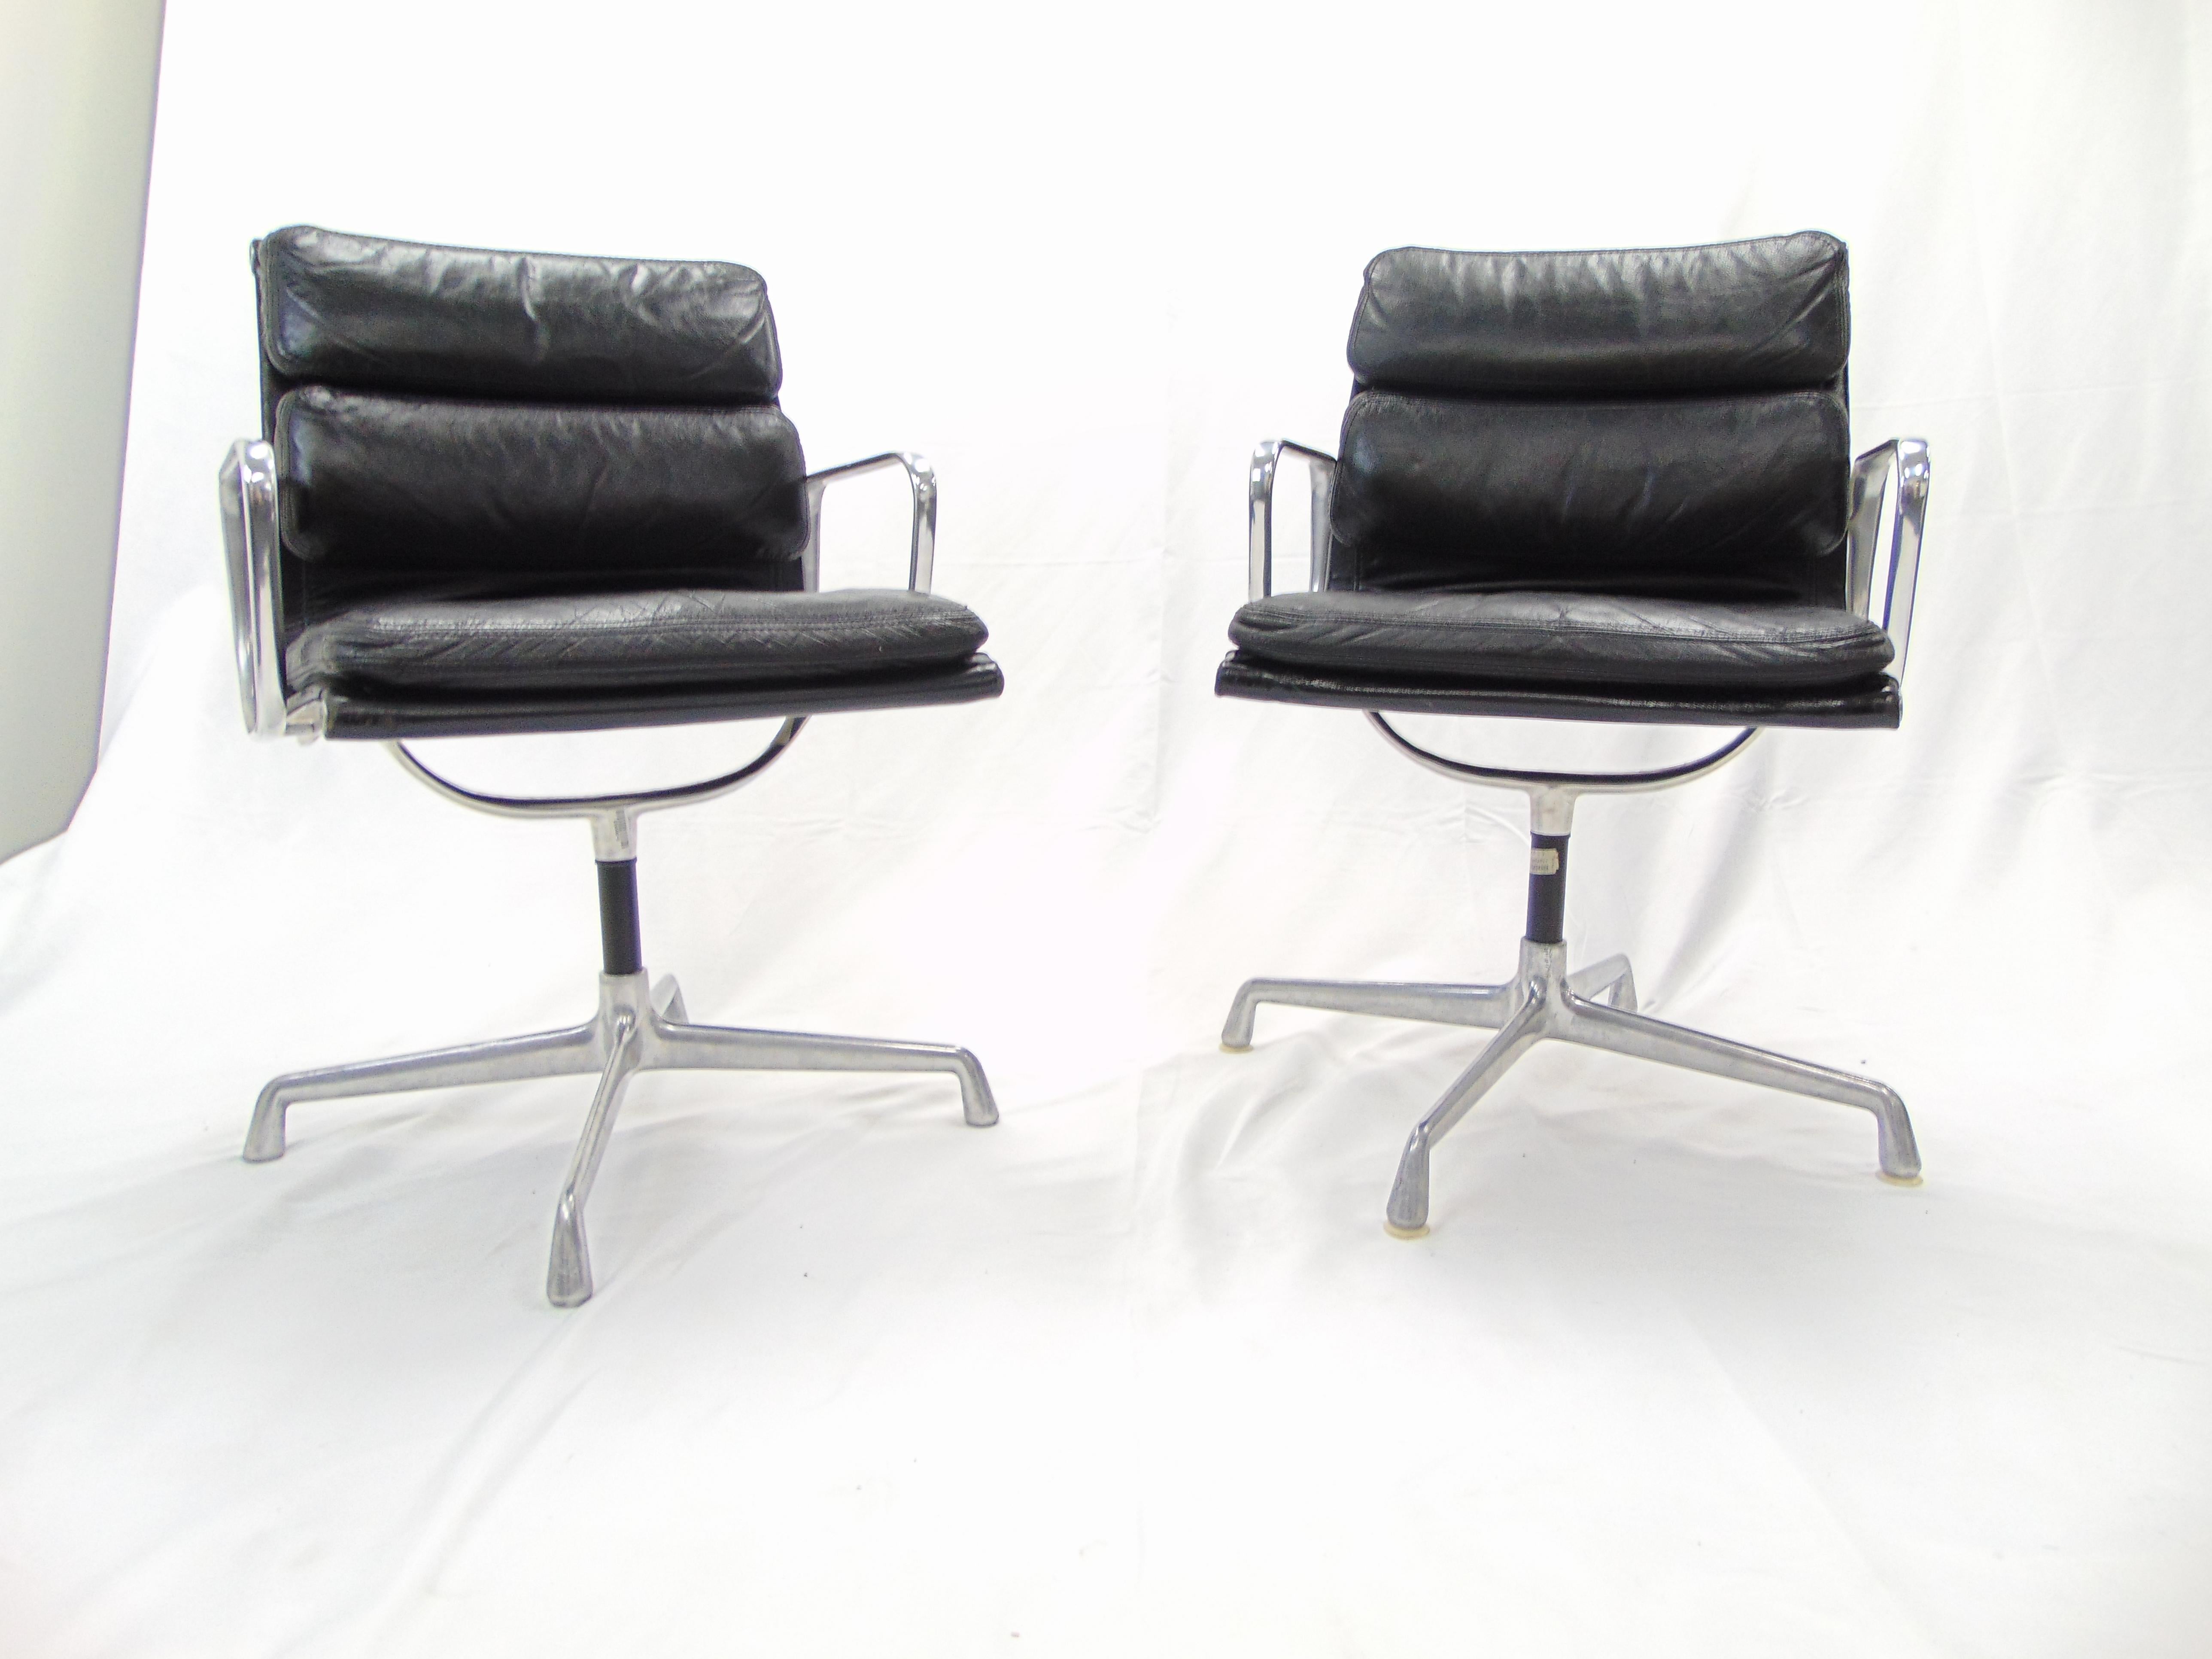 These are a pair of wonderful vintage midcentury chairs from the 1970s designed by Charles and Ray Eames for Herman Miller. The chairs are aluminum and black leather. One of the chairs has the plastic feet on it and the other does not. One chair had